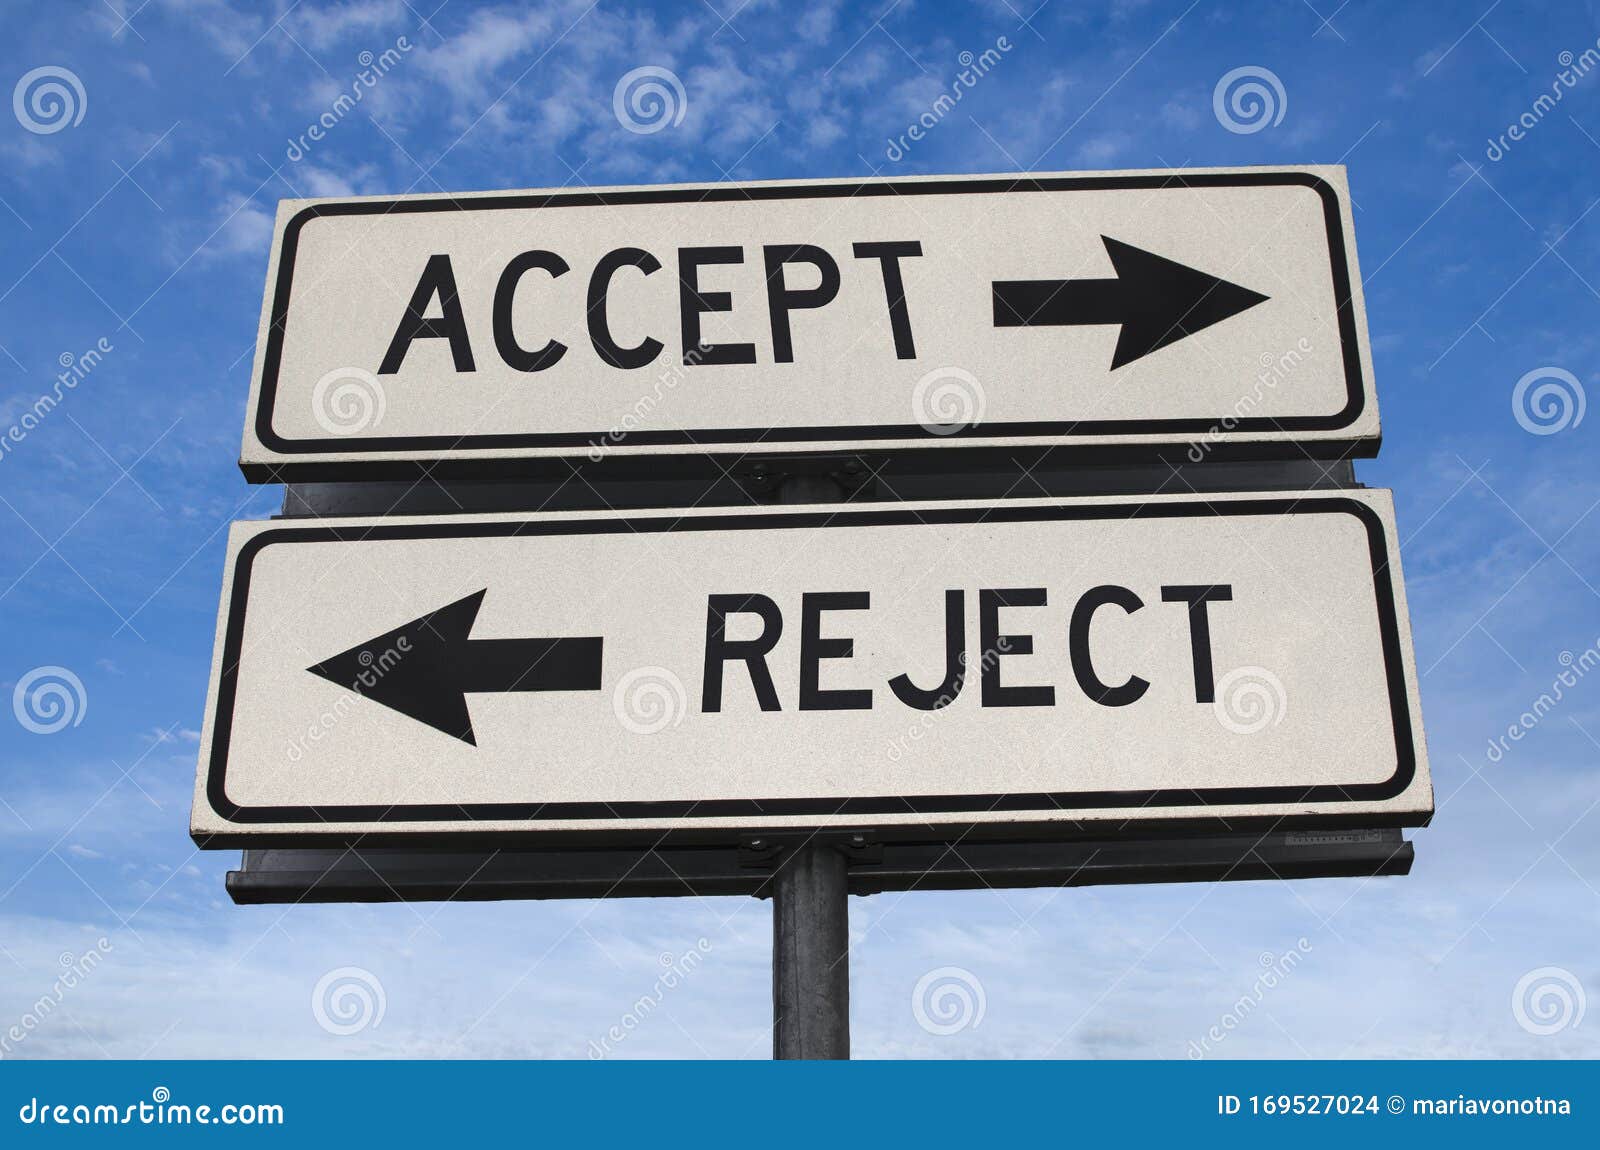 white two street signs with arrow on metal pole with word accept and reject